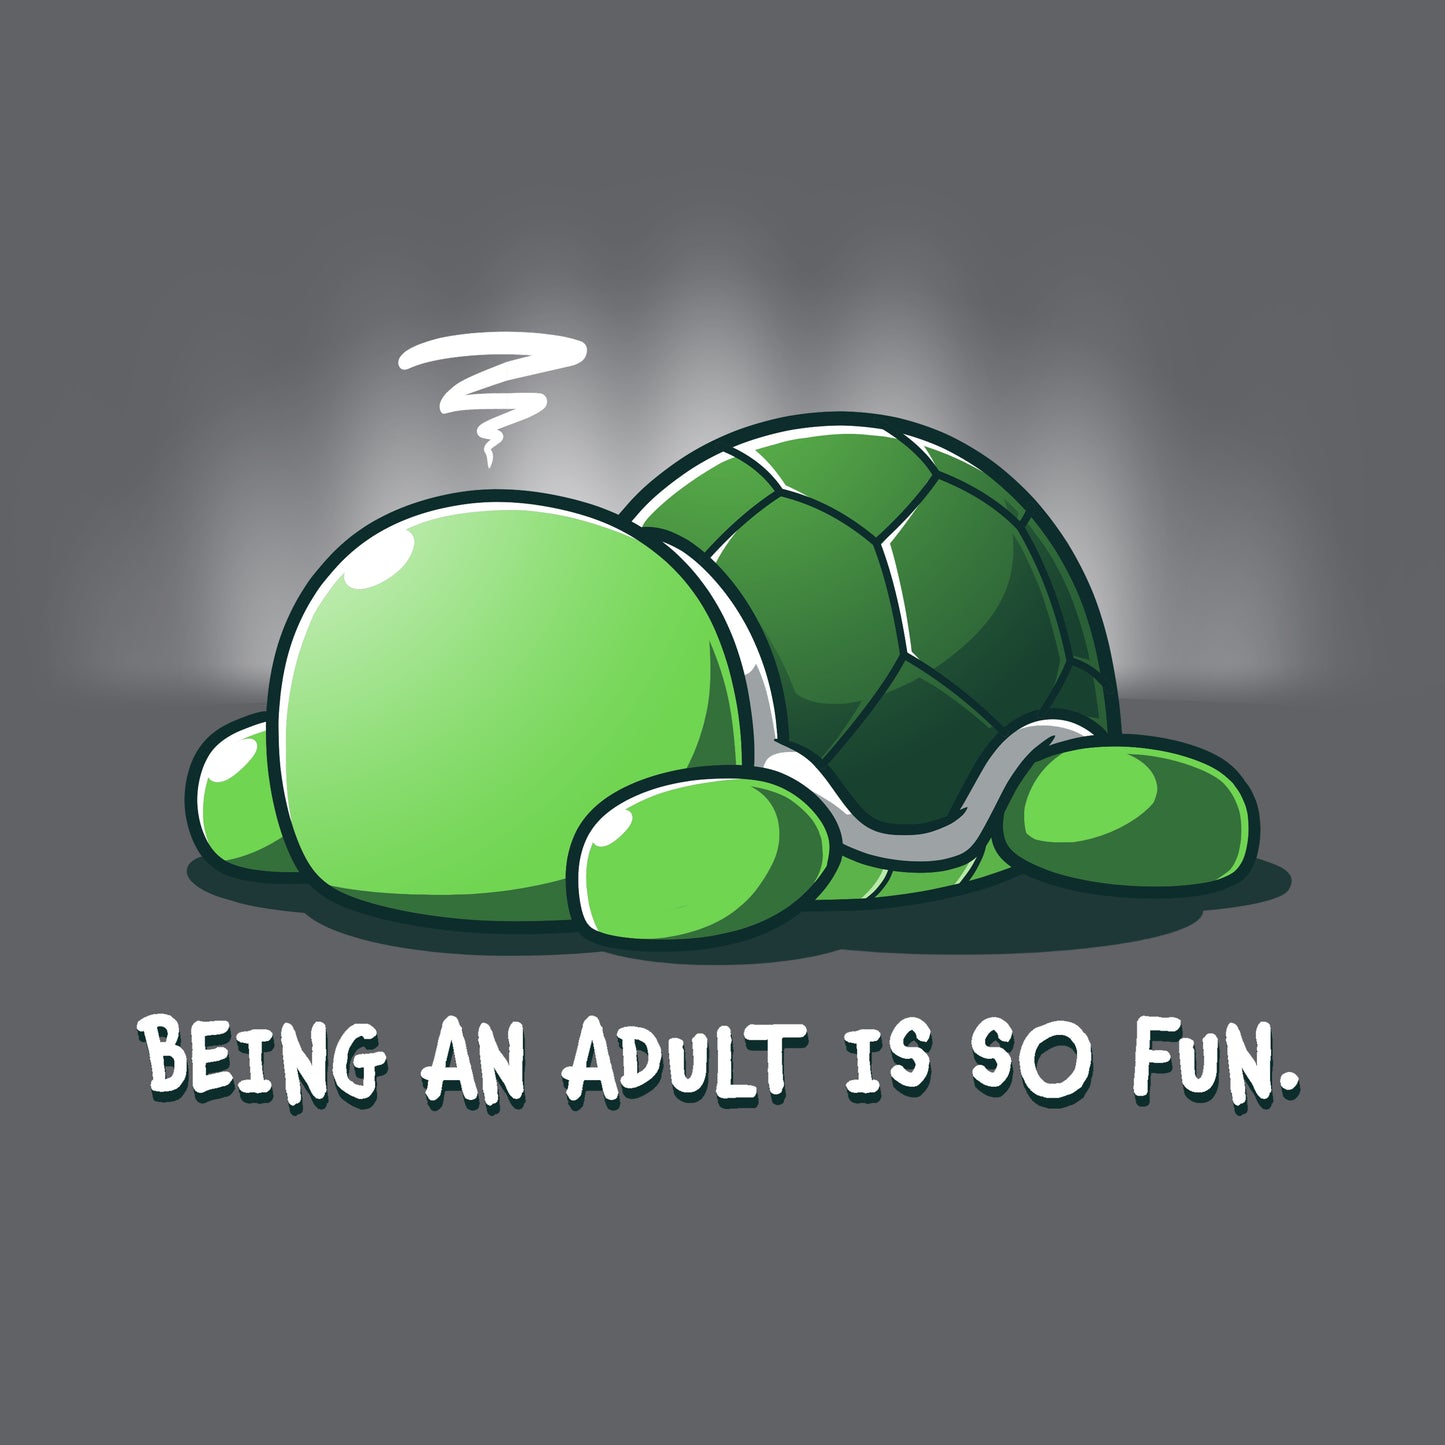 Being an adult is fun with the TeeTurtle product "Being An Adult Is So Fun".